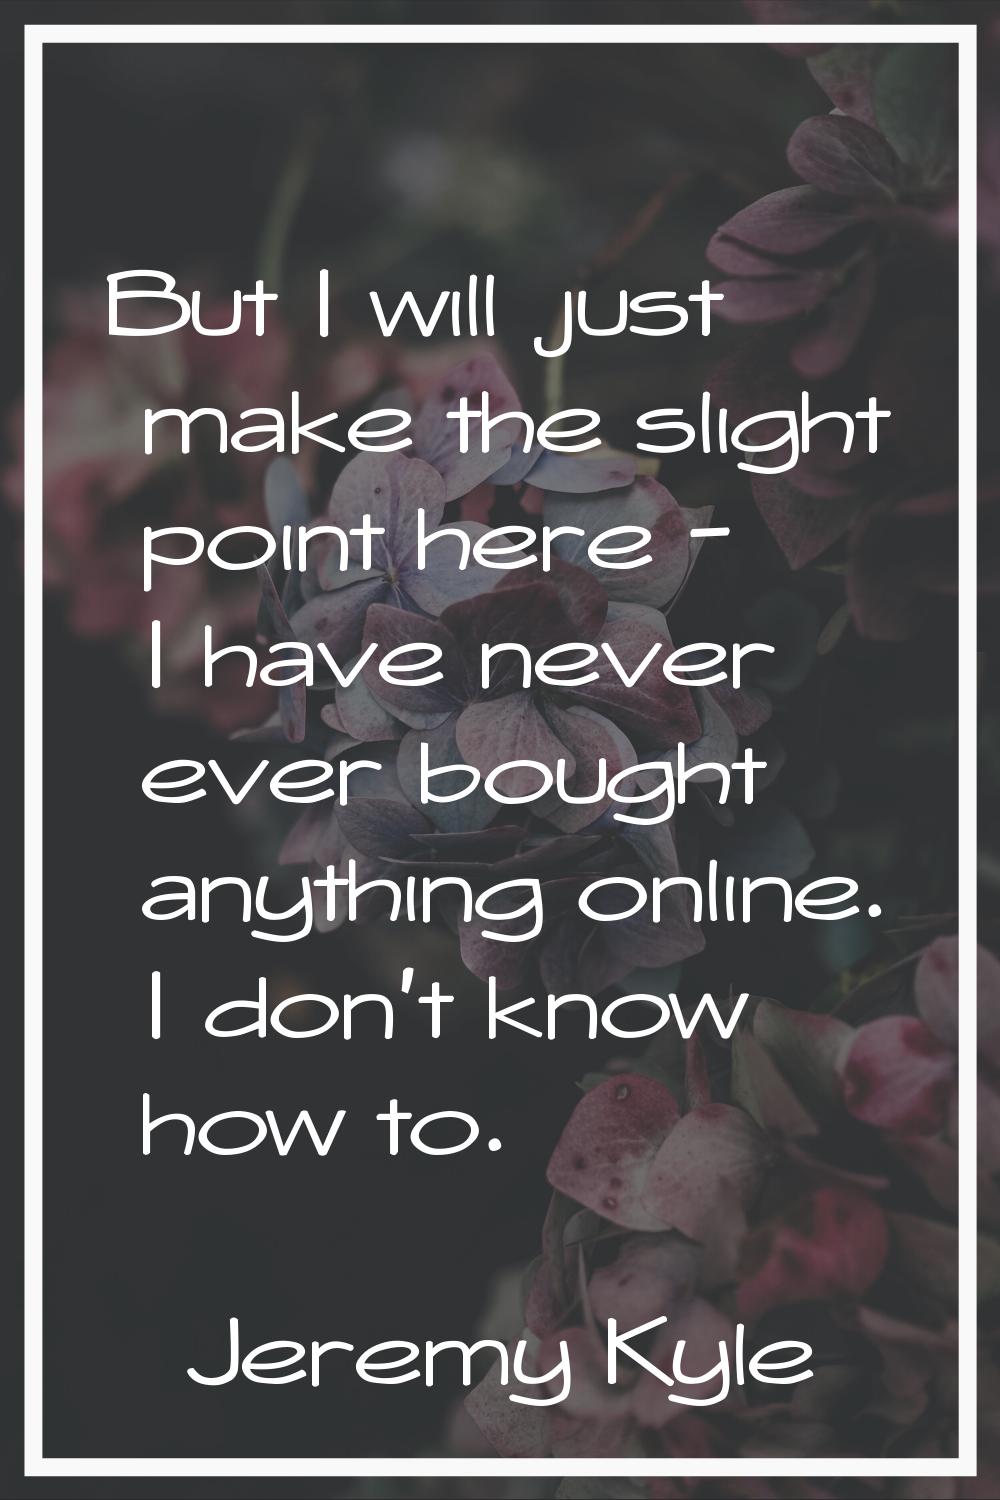 But I will just make the slight point here - I have never ever bought anything online. I don't know